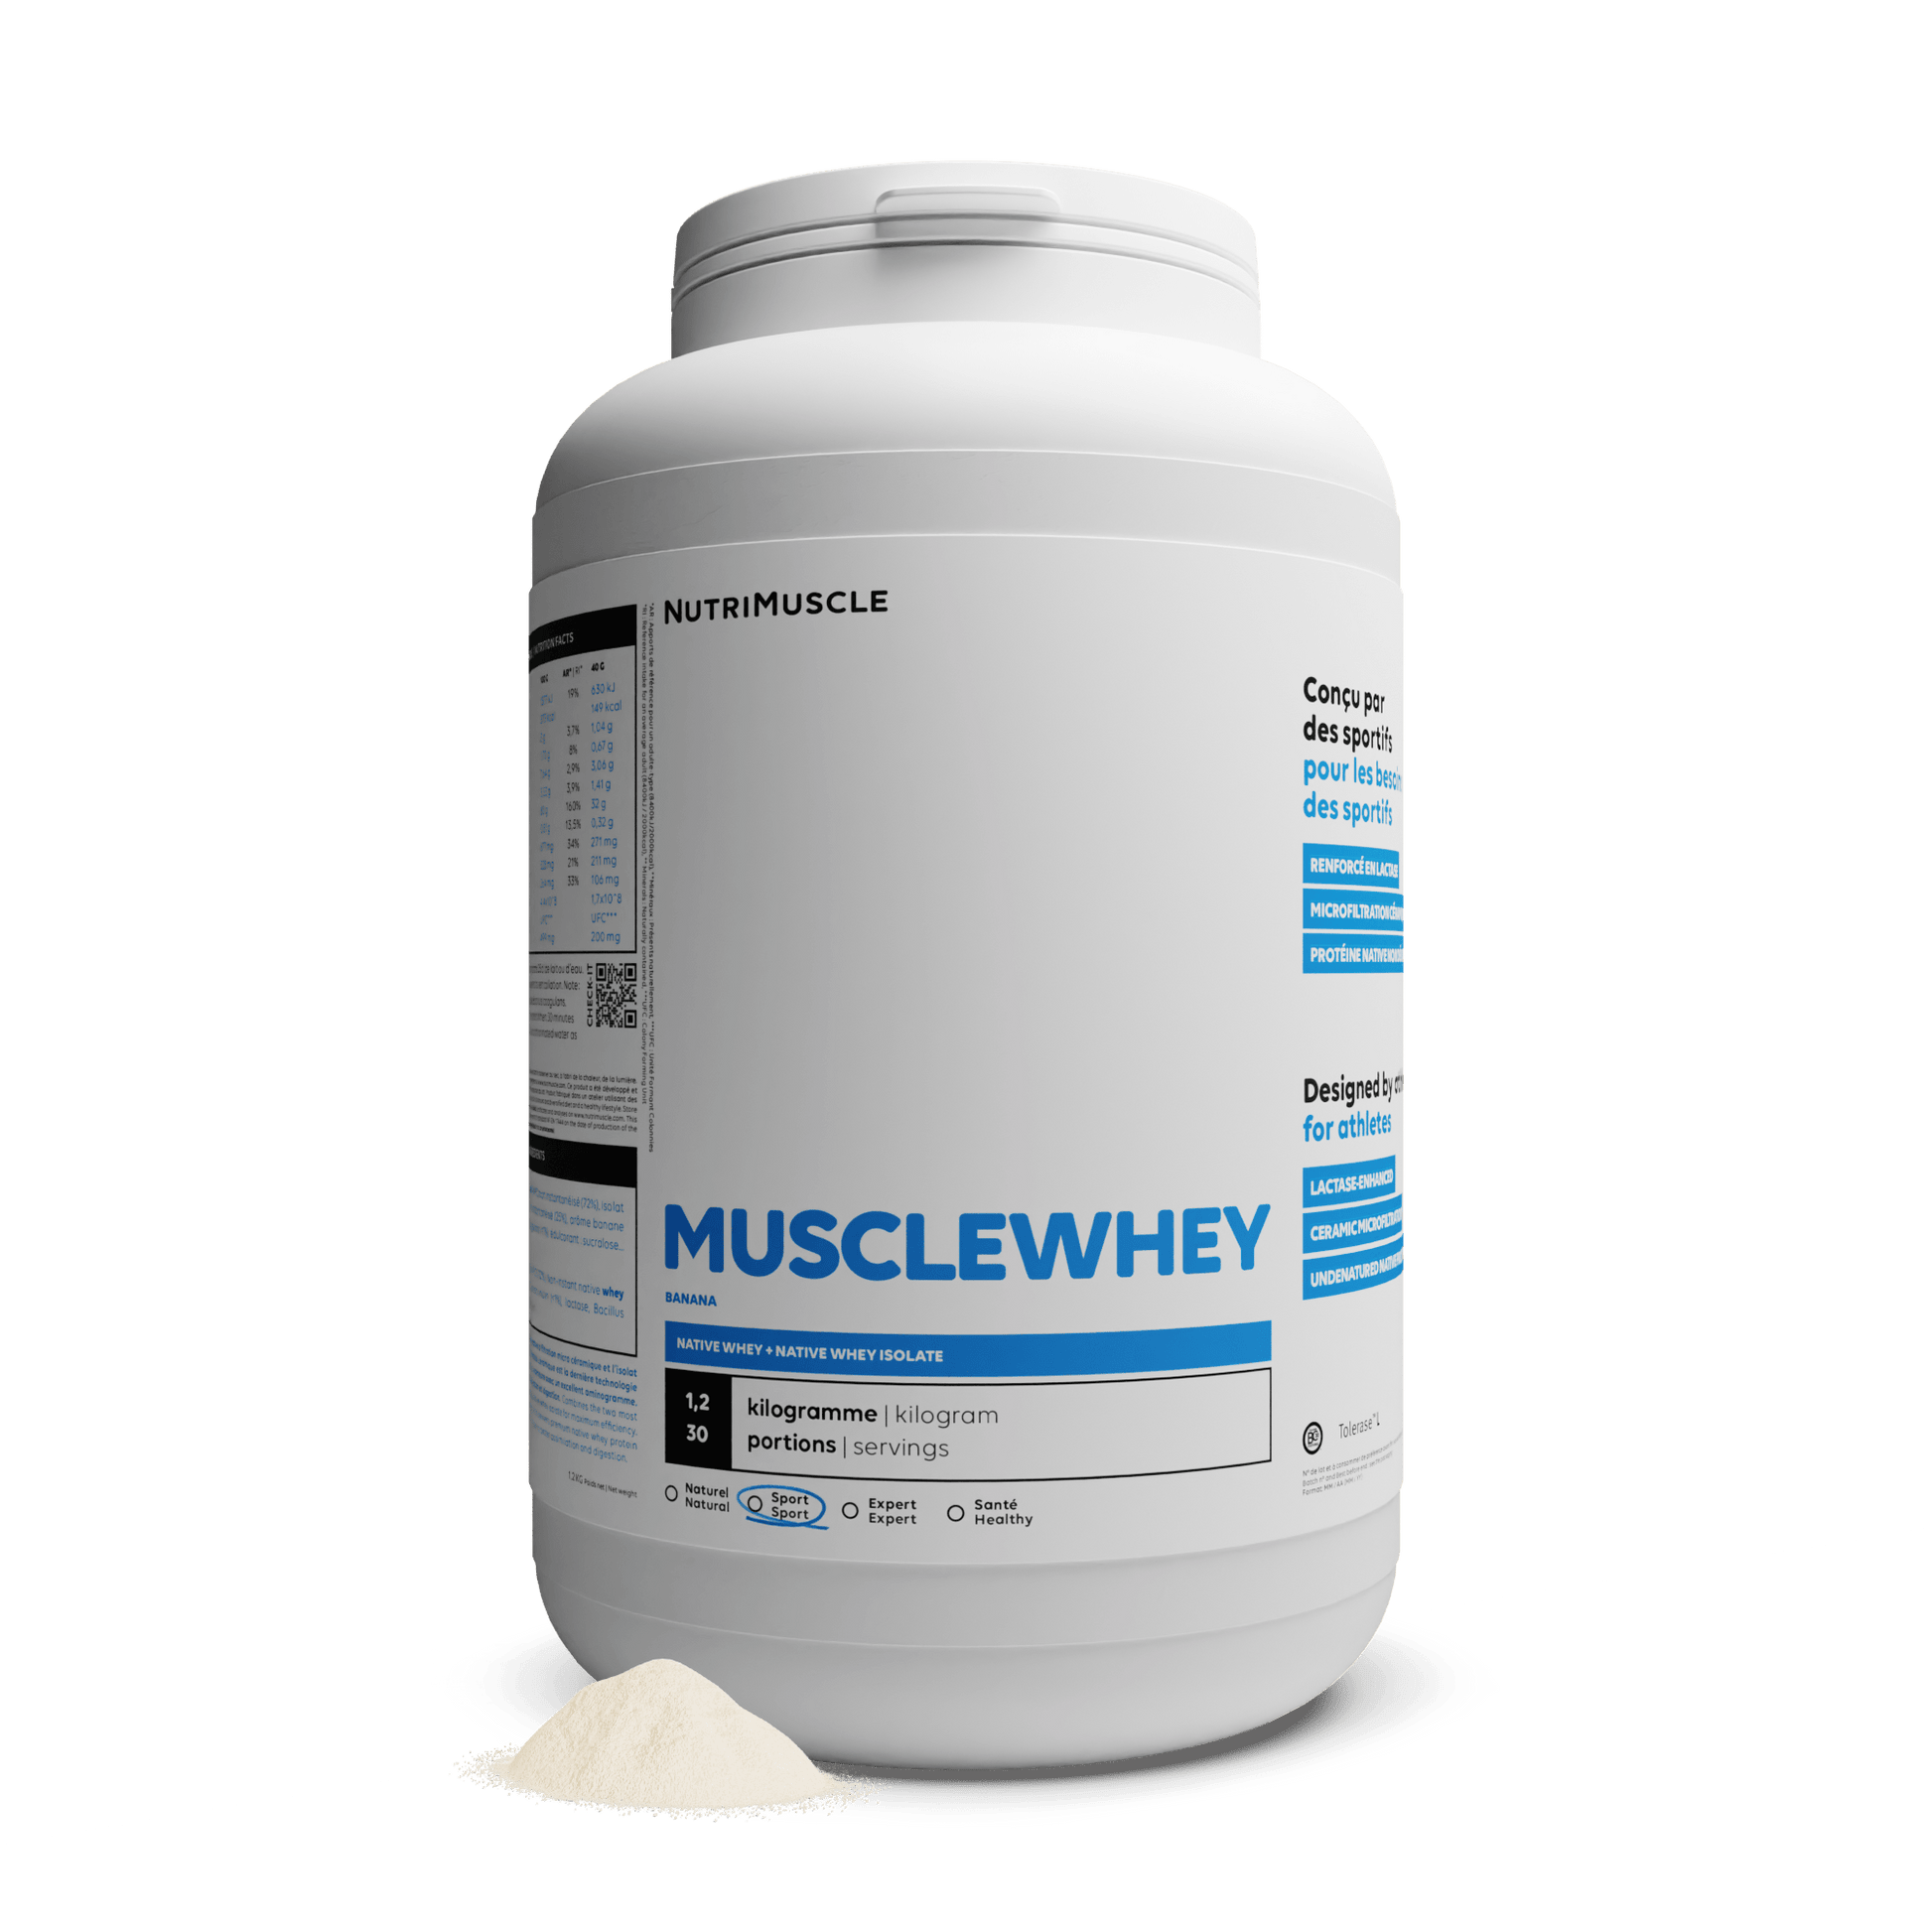 Nutrimuscle Protéines Banane / 1.20 kg Musclewhey - Mix Protein